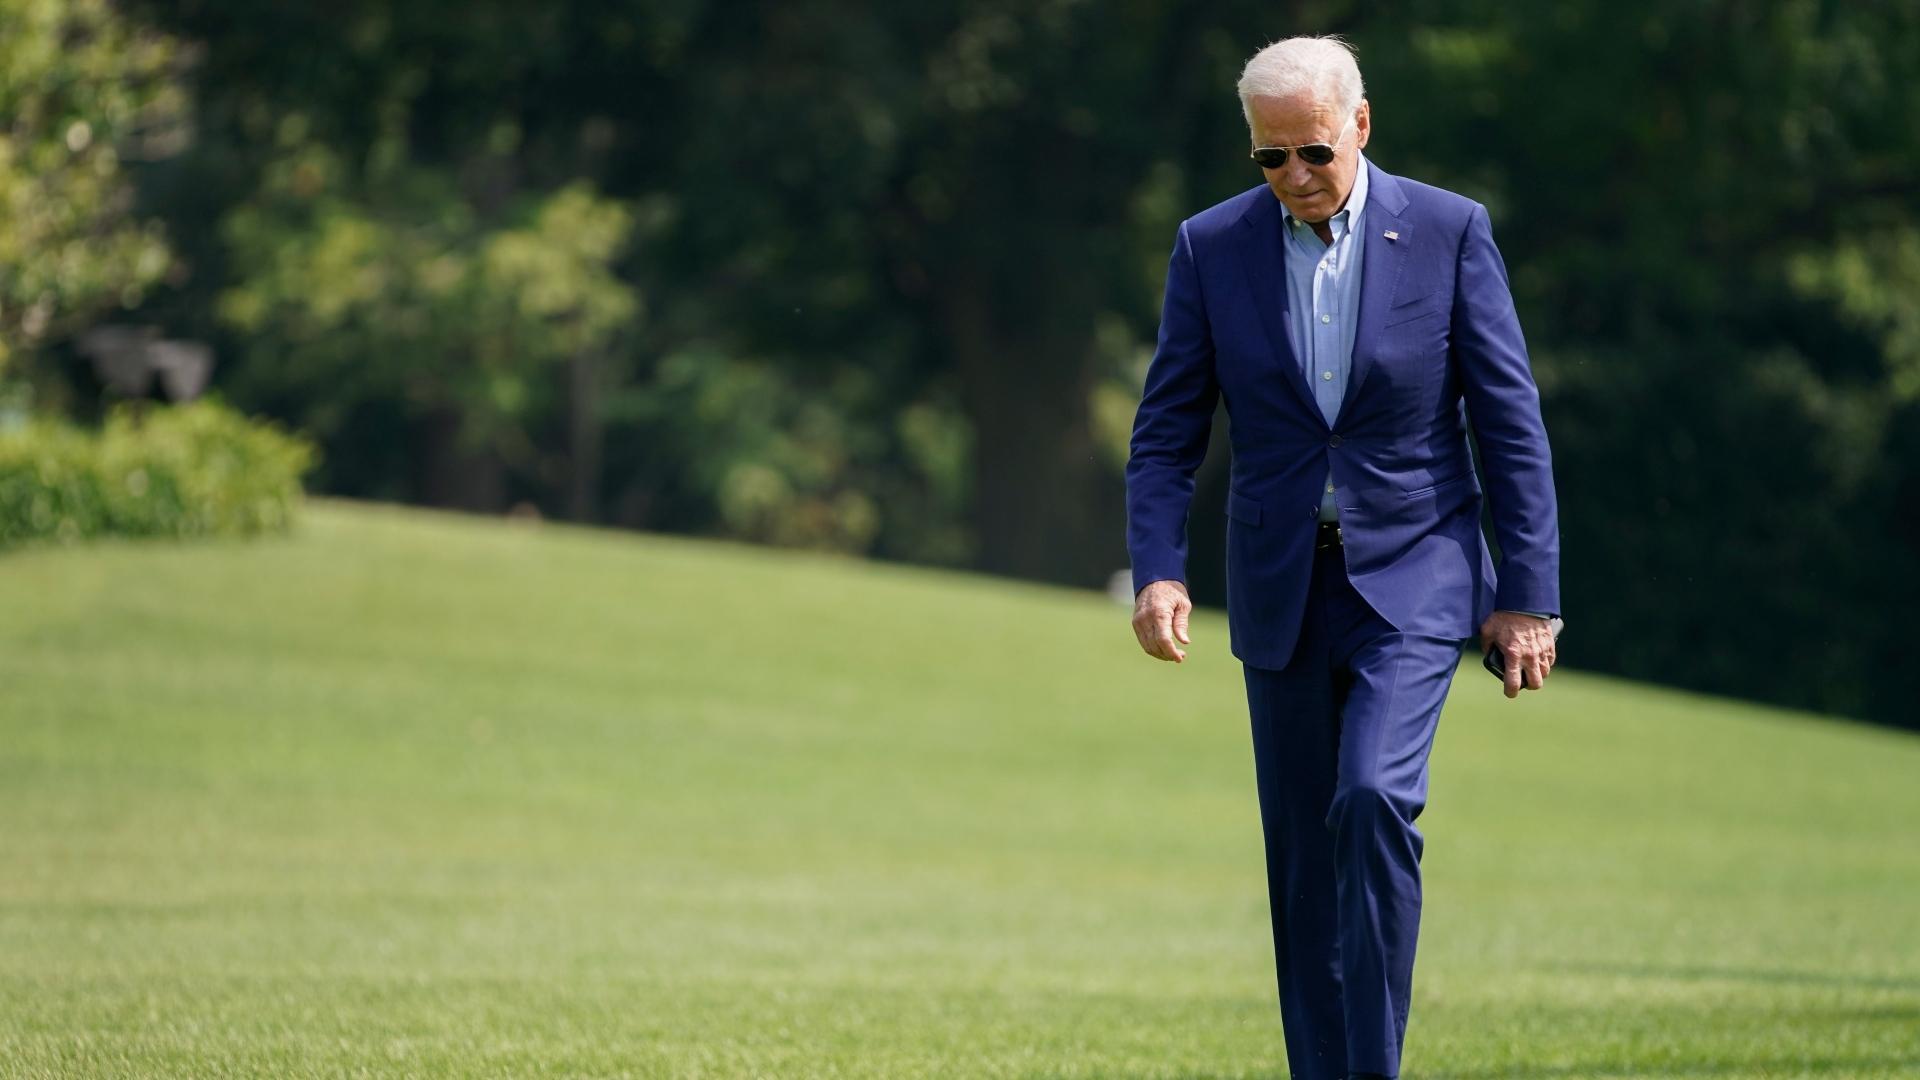 President Joe Biden walks on the South Lawn of the White House after stepping off Marine One, Sunday, July 25, 2021, in Washington. Biden is returning to Washington after spending the weekend in Delaware. (AP Photo / Pablo Martinez Monsivais)